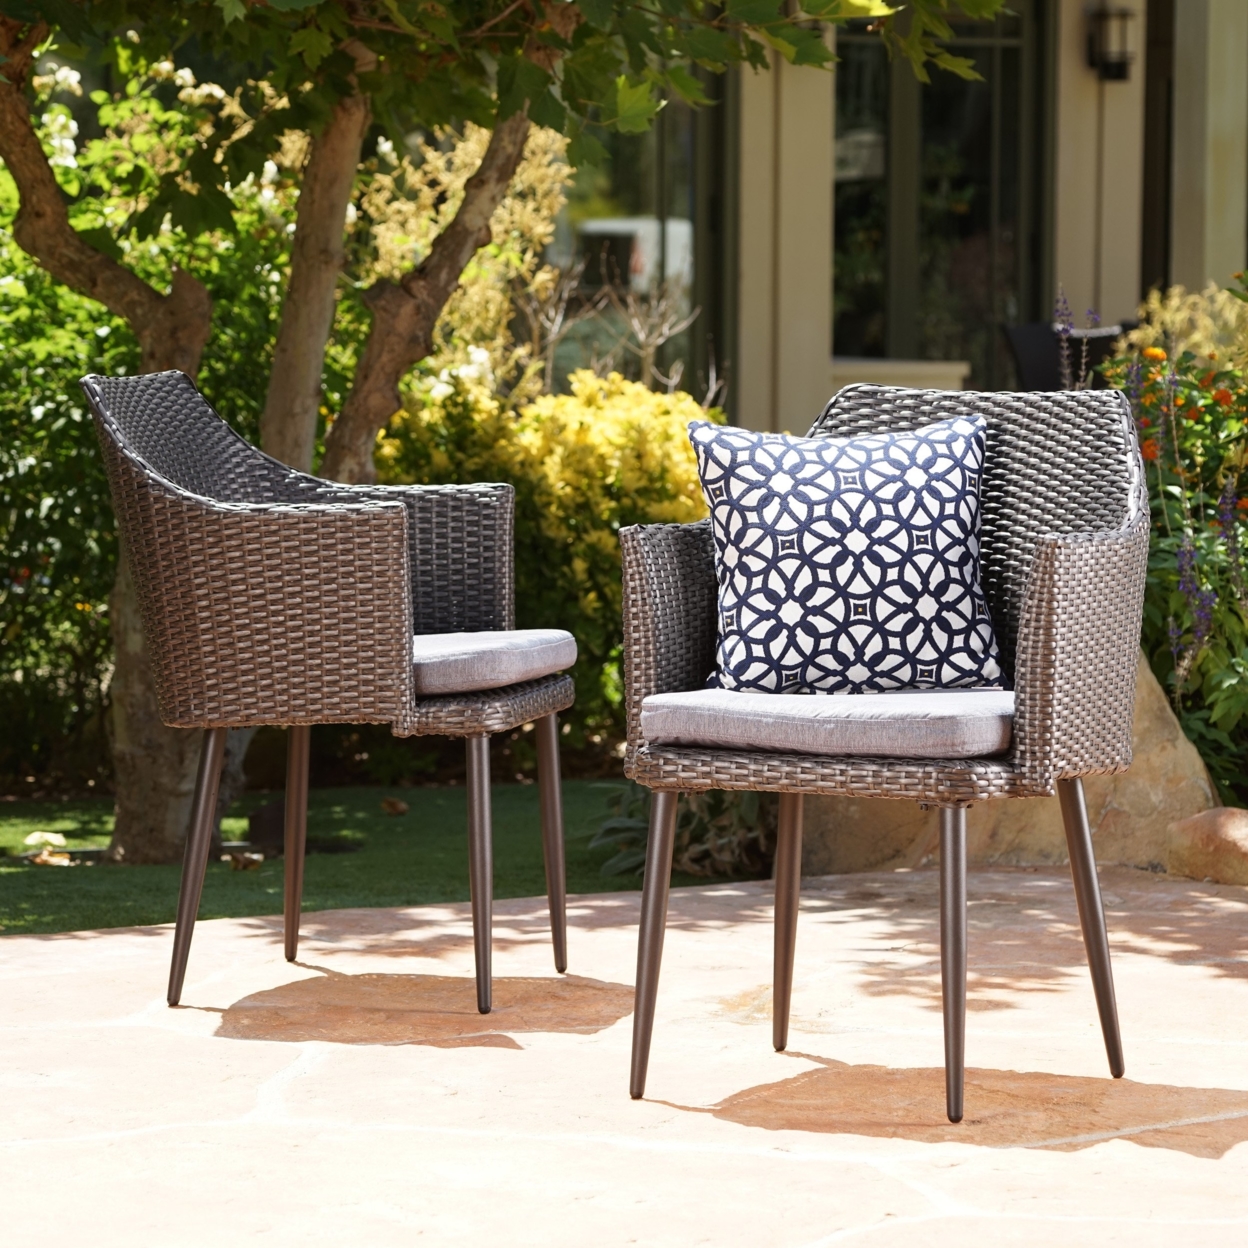 Ibiza Outdoor Wicker Dining Chairs With Water Resistant Cushion - Mixed Black/gray